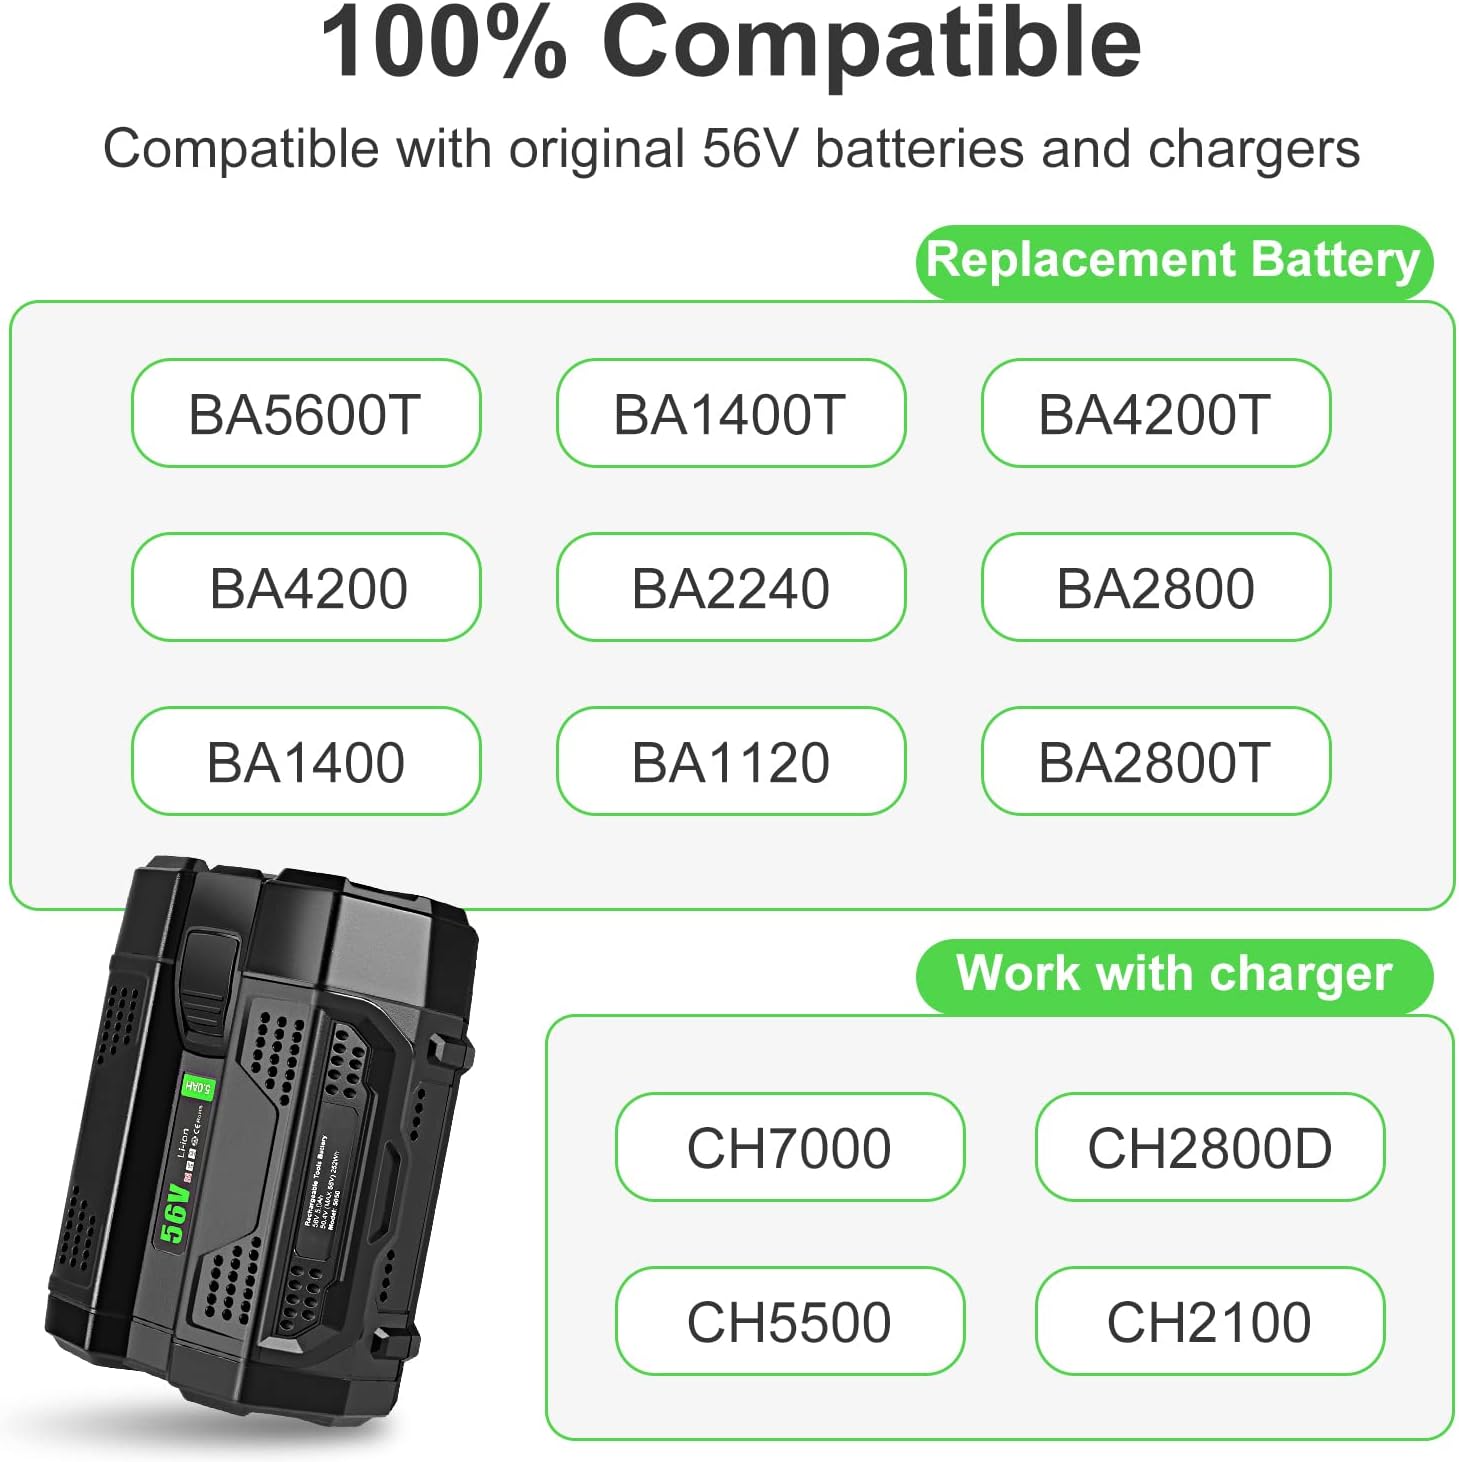 Replacement for EGO 56V Battery,5.0 Ah Lithium Ion Battery Compatible with EGO 56V Batteries Charges Tools BA1400T BA2800T BA2242T BA2800